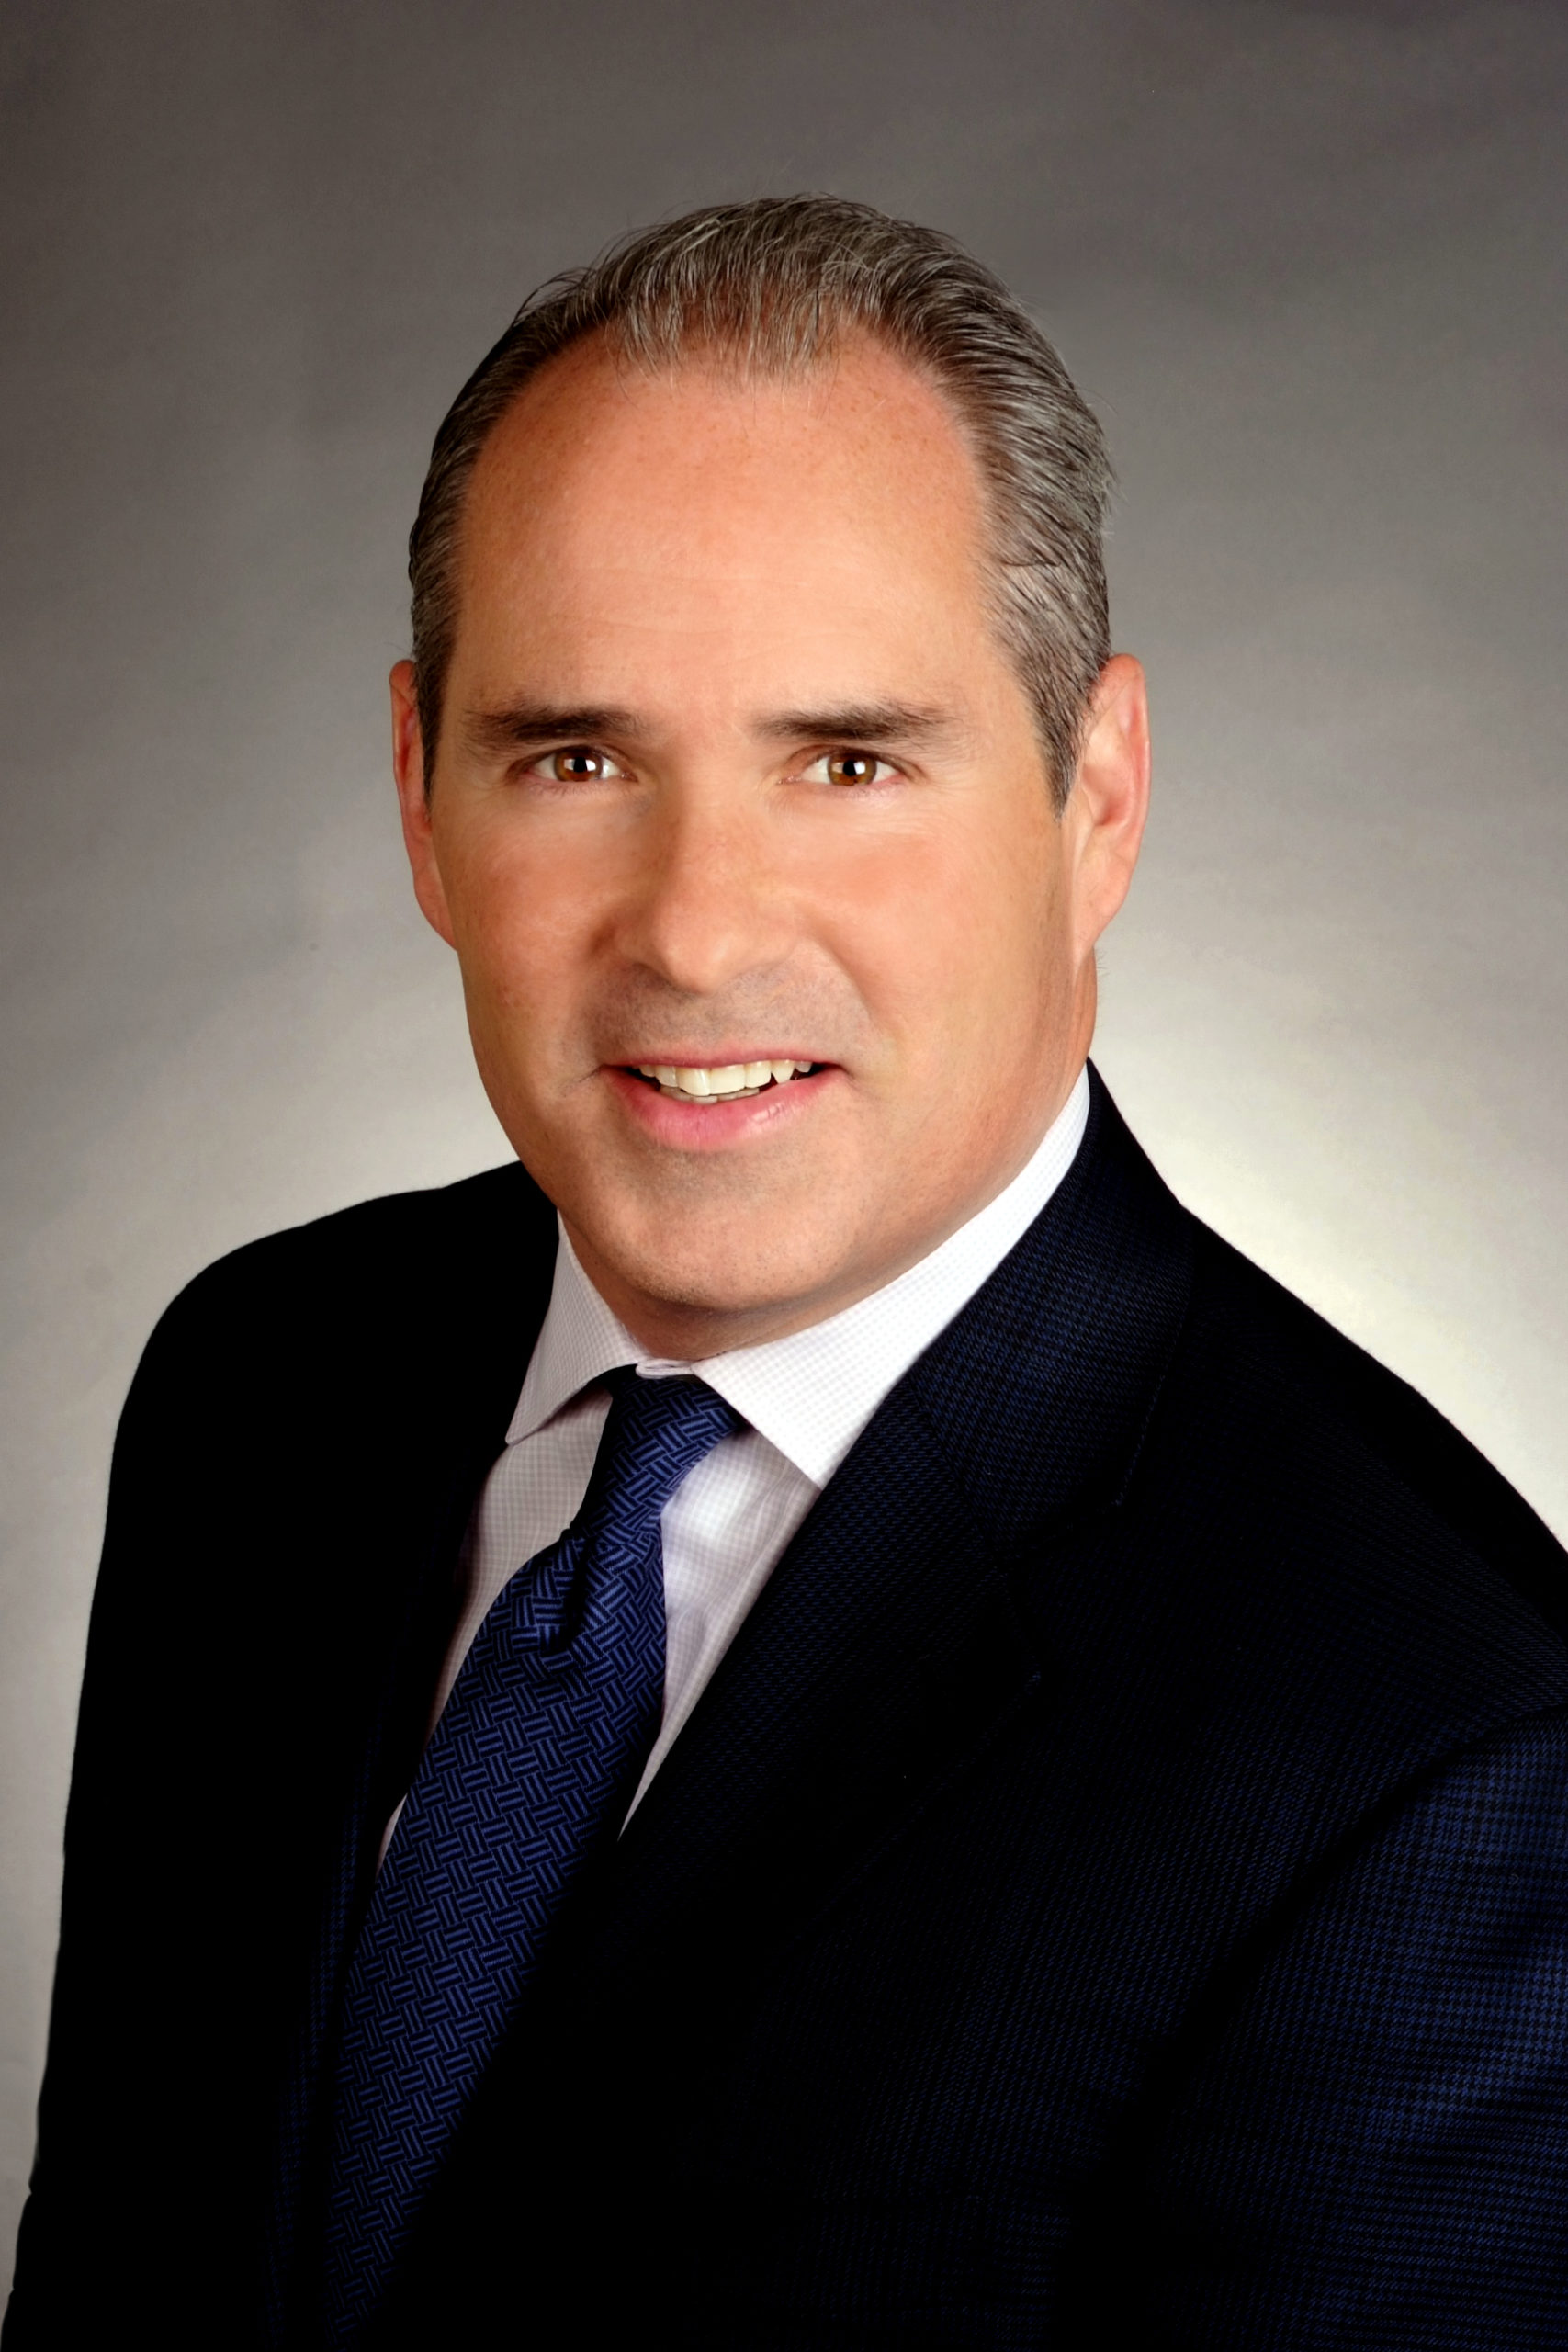 Marc Perrin, Founder and Managing Partner of The Roxborough Group